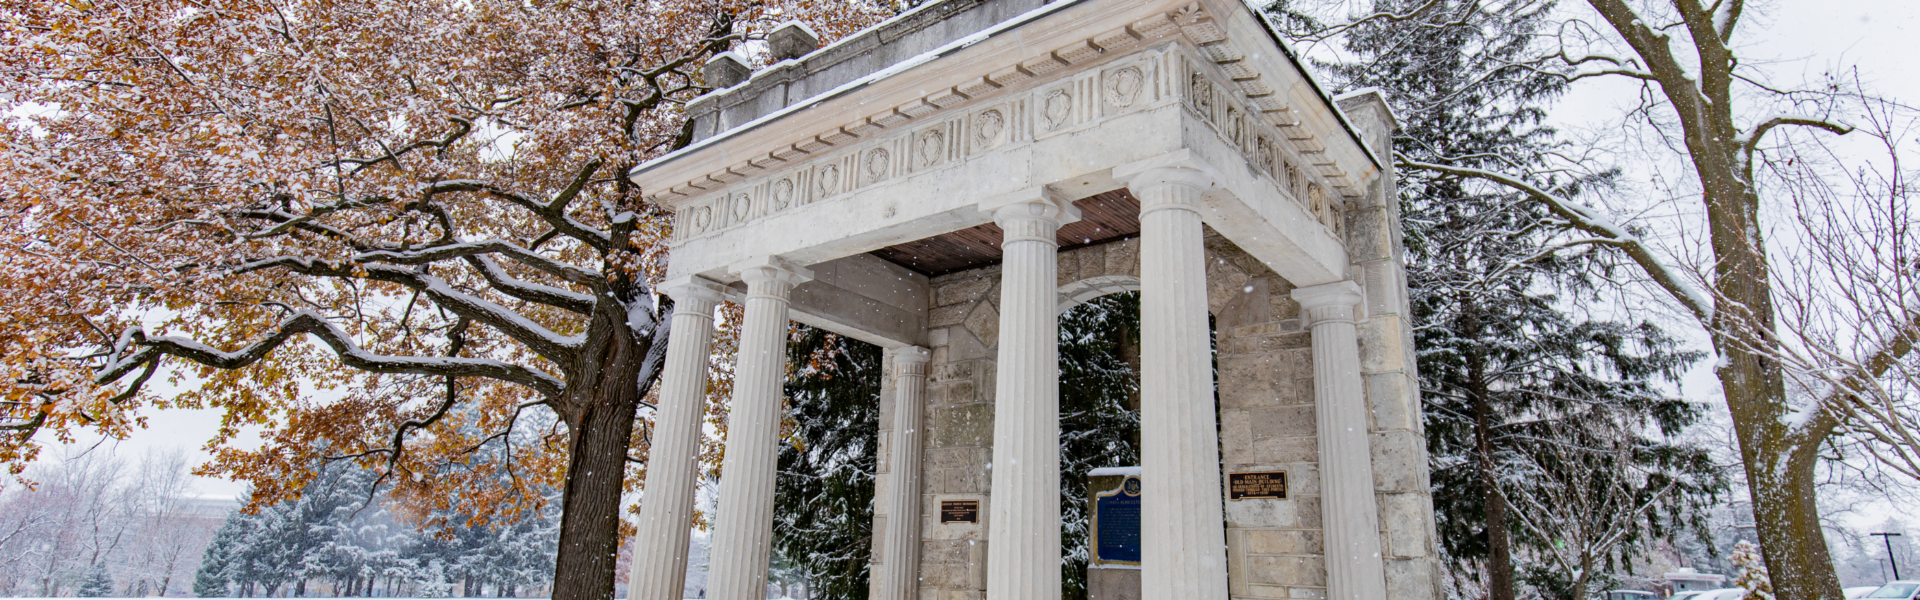 The U of G Portico on a snowy winter day.